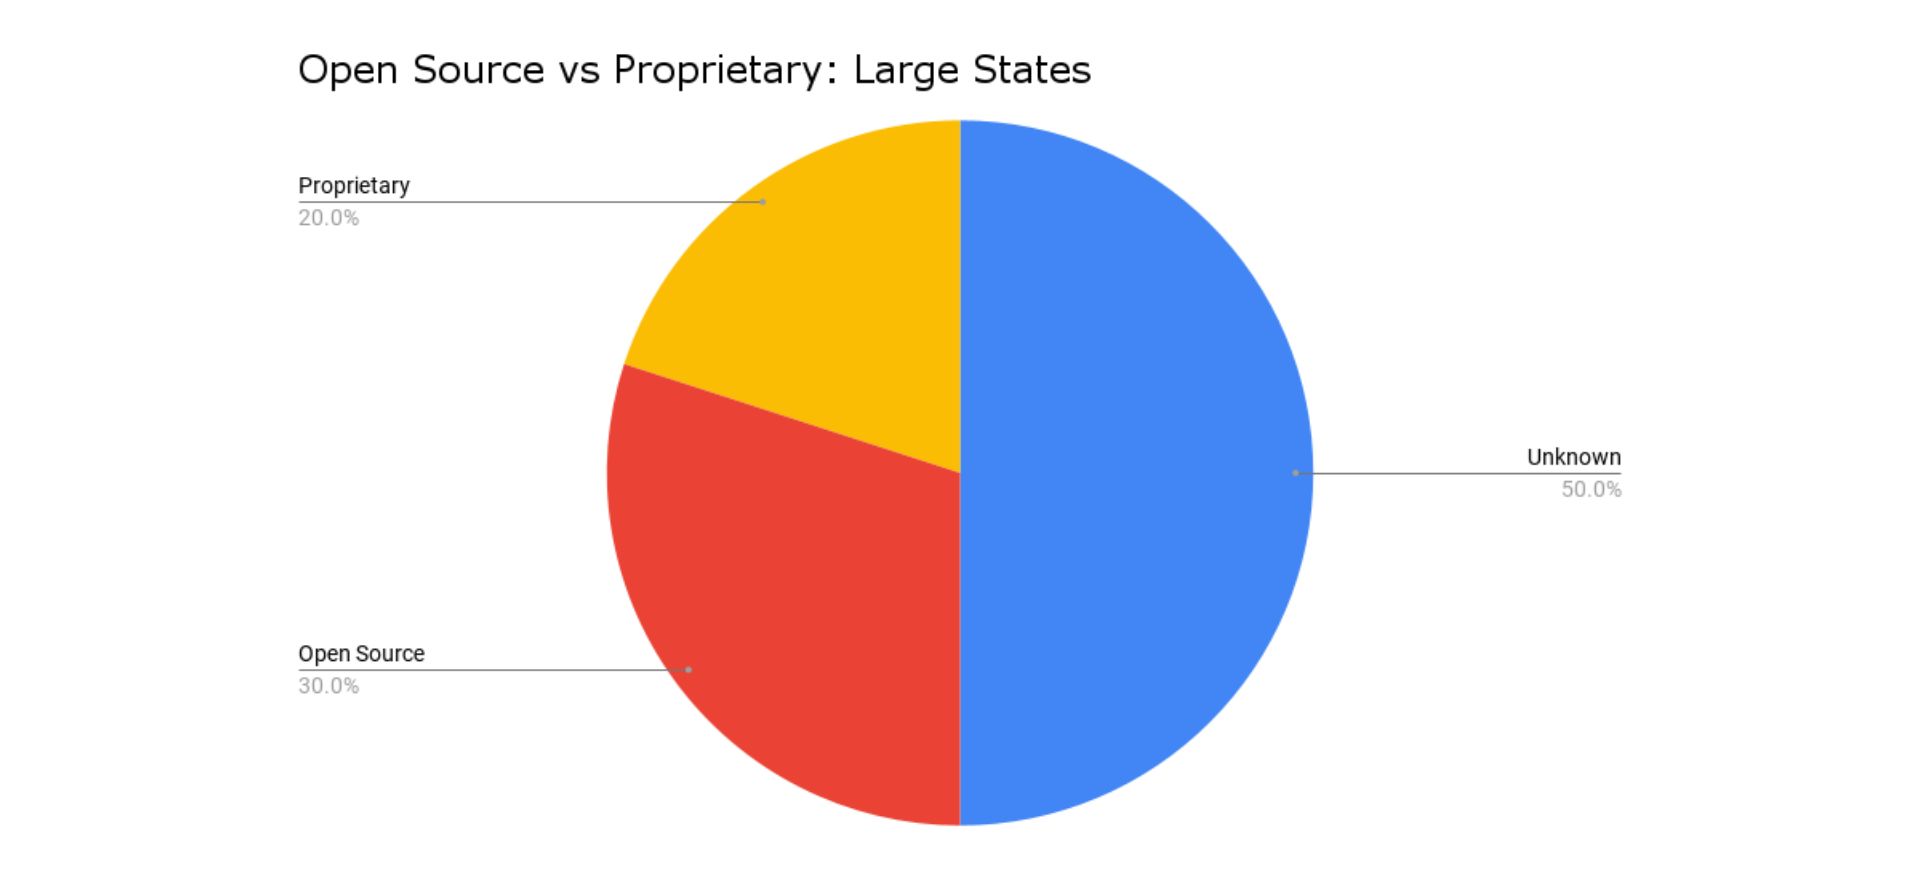 open source vs proprietary: large states